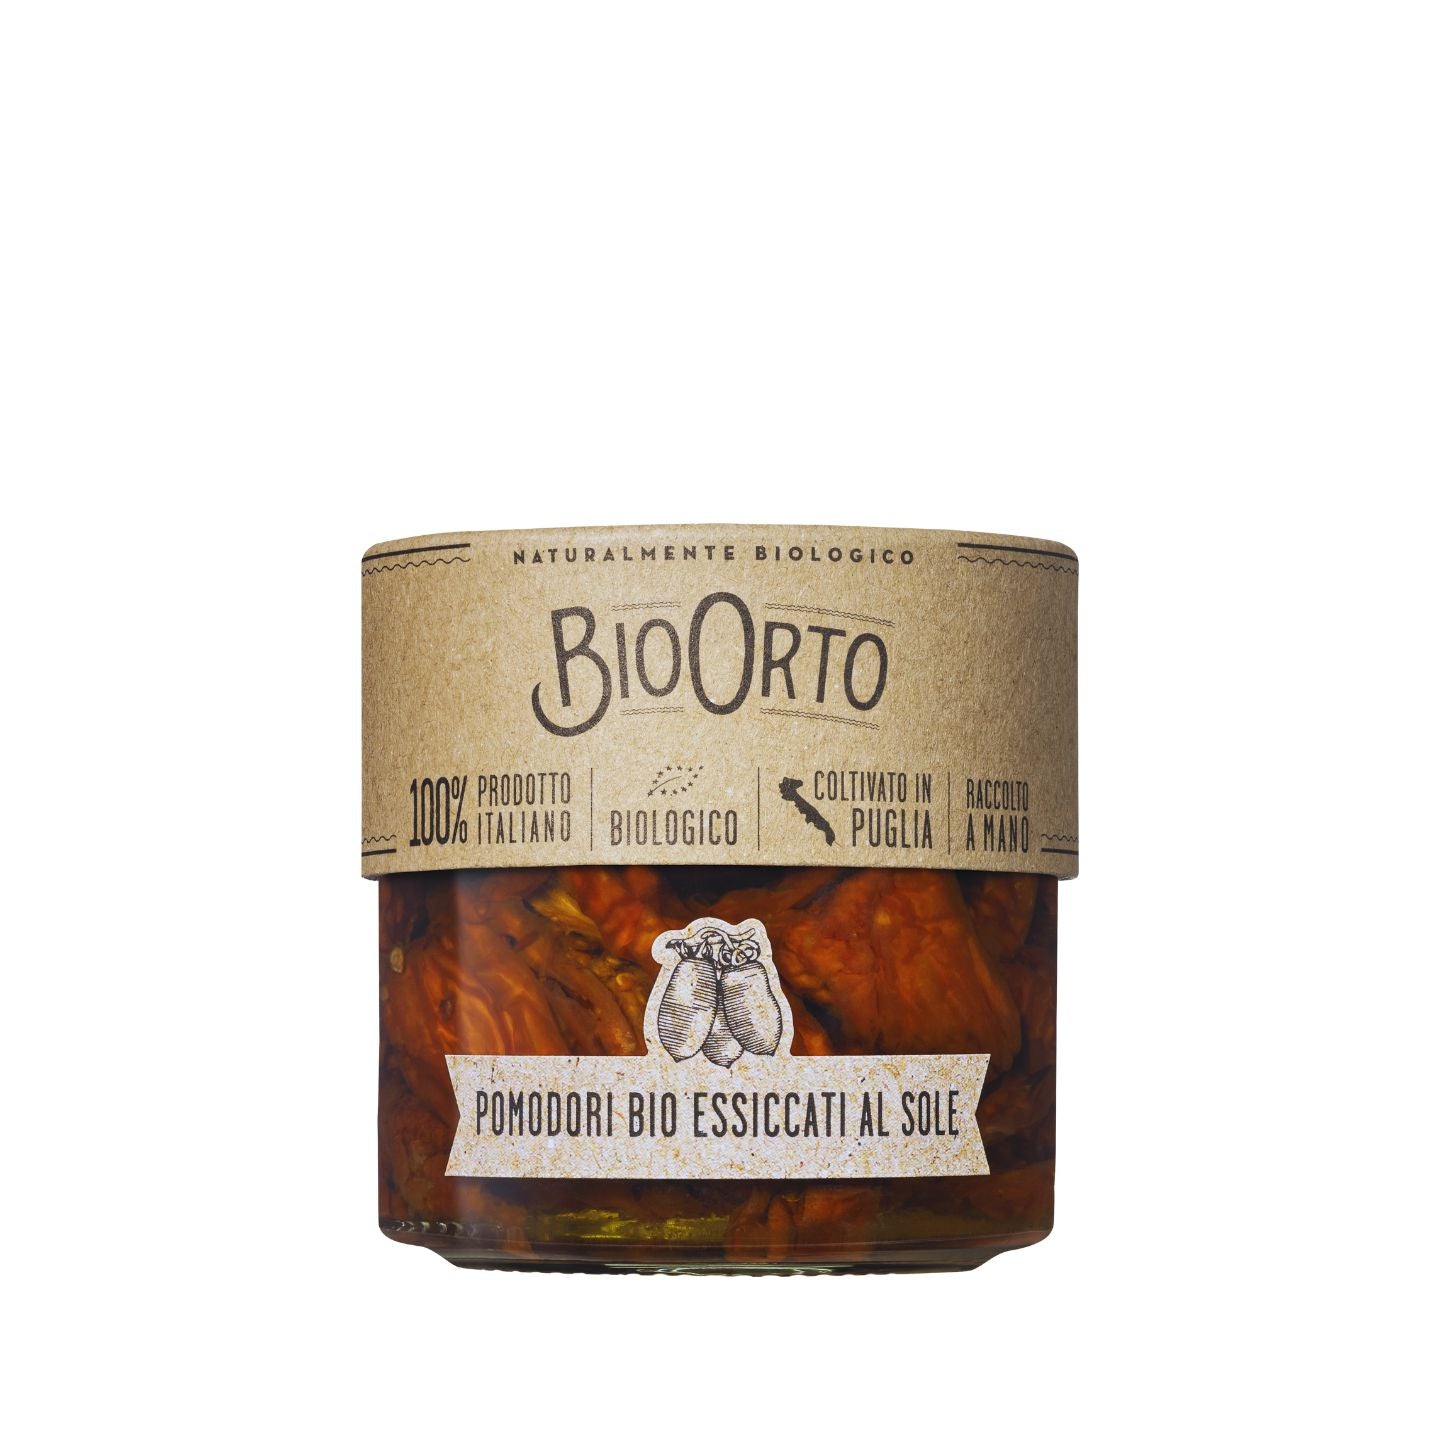 Bio Orto Organic Sundried Tomatoes in Extra Virgin Olive Oil 212ml  | Imported and distributed in the UK by Just Gourmet Foods